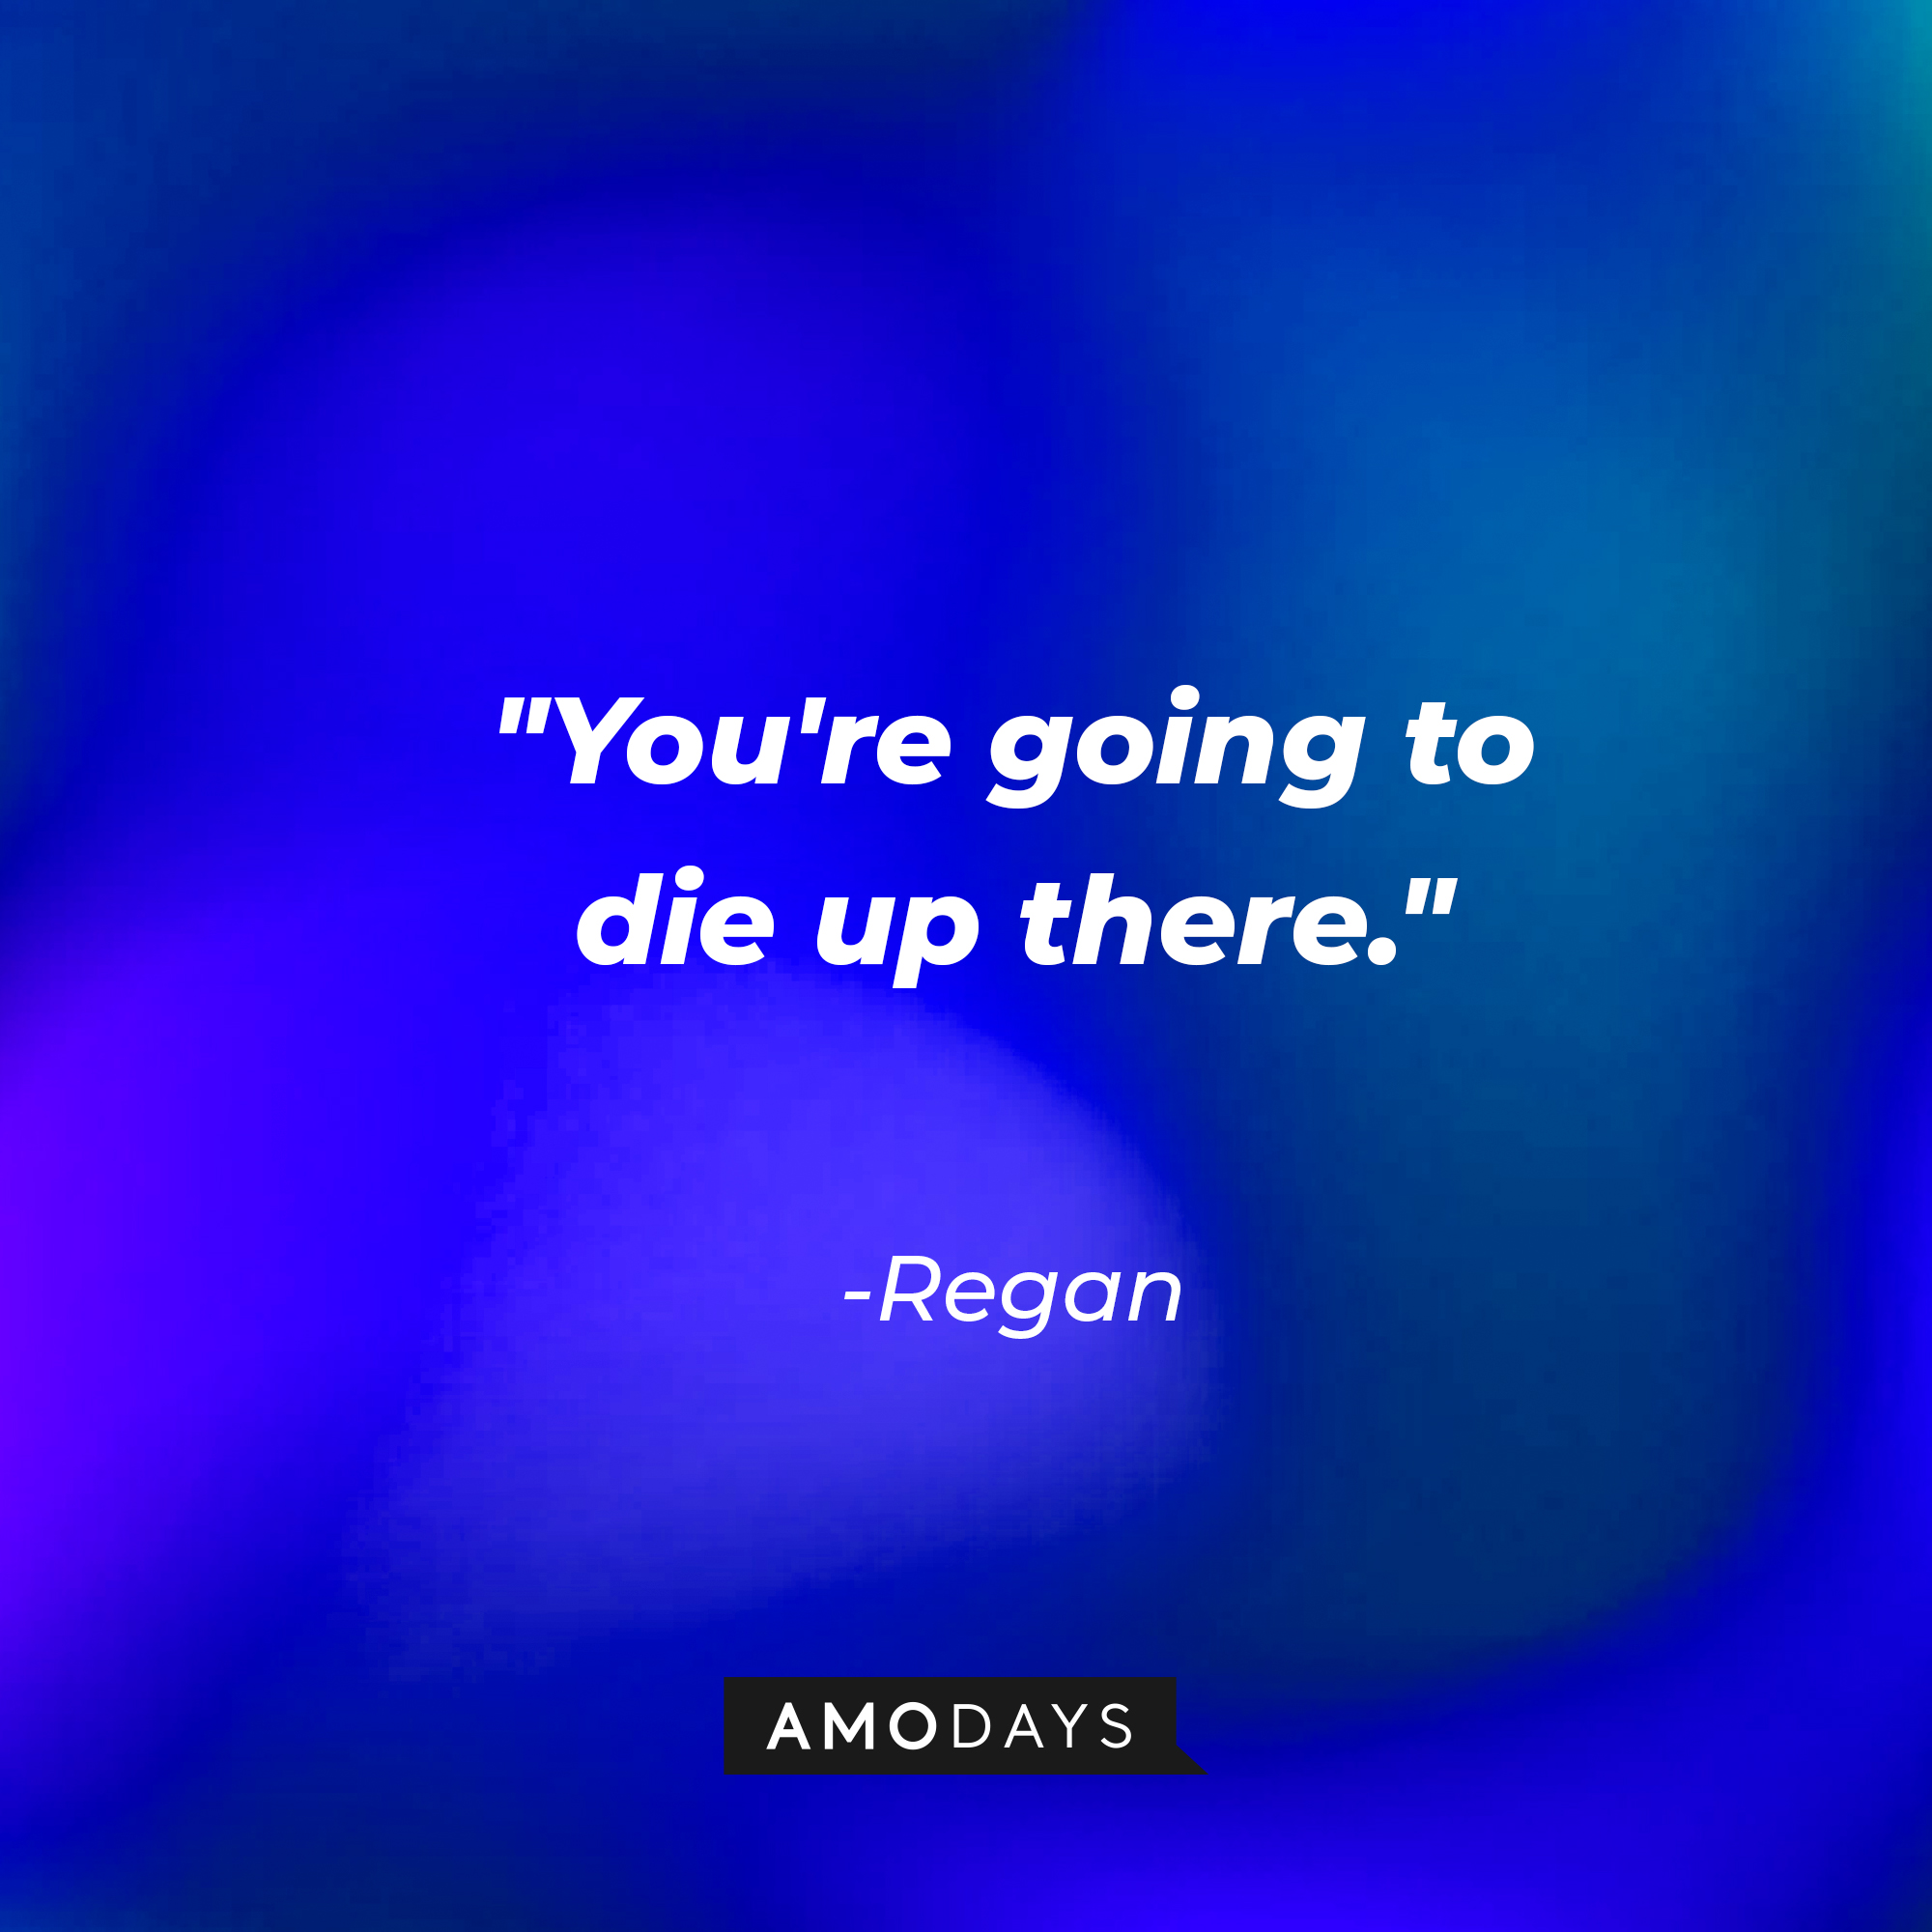 Regan's quote: "You're going to die up there." | Source: AmoDAys